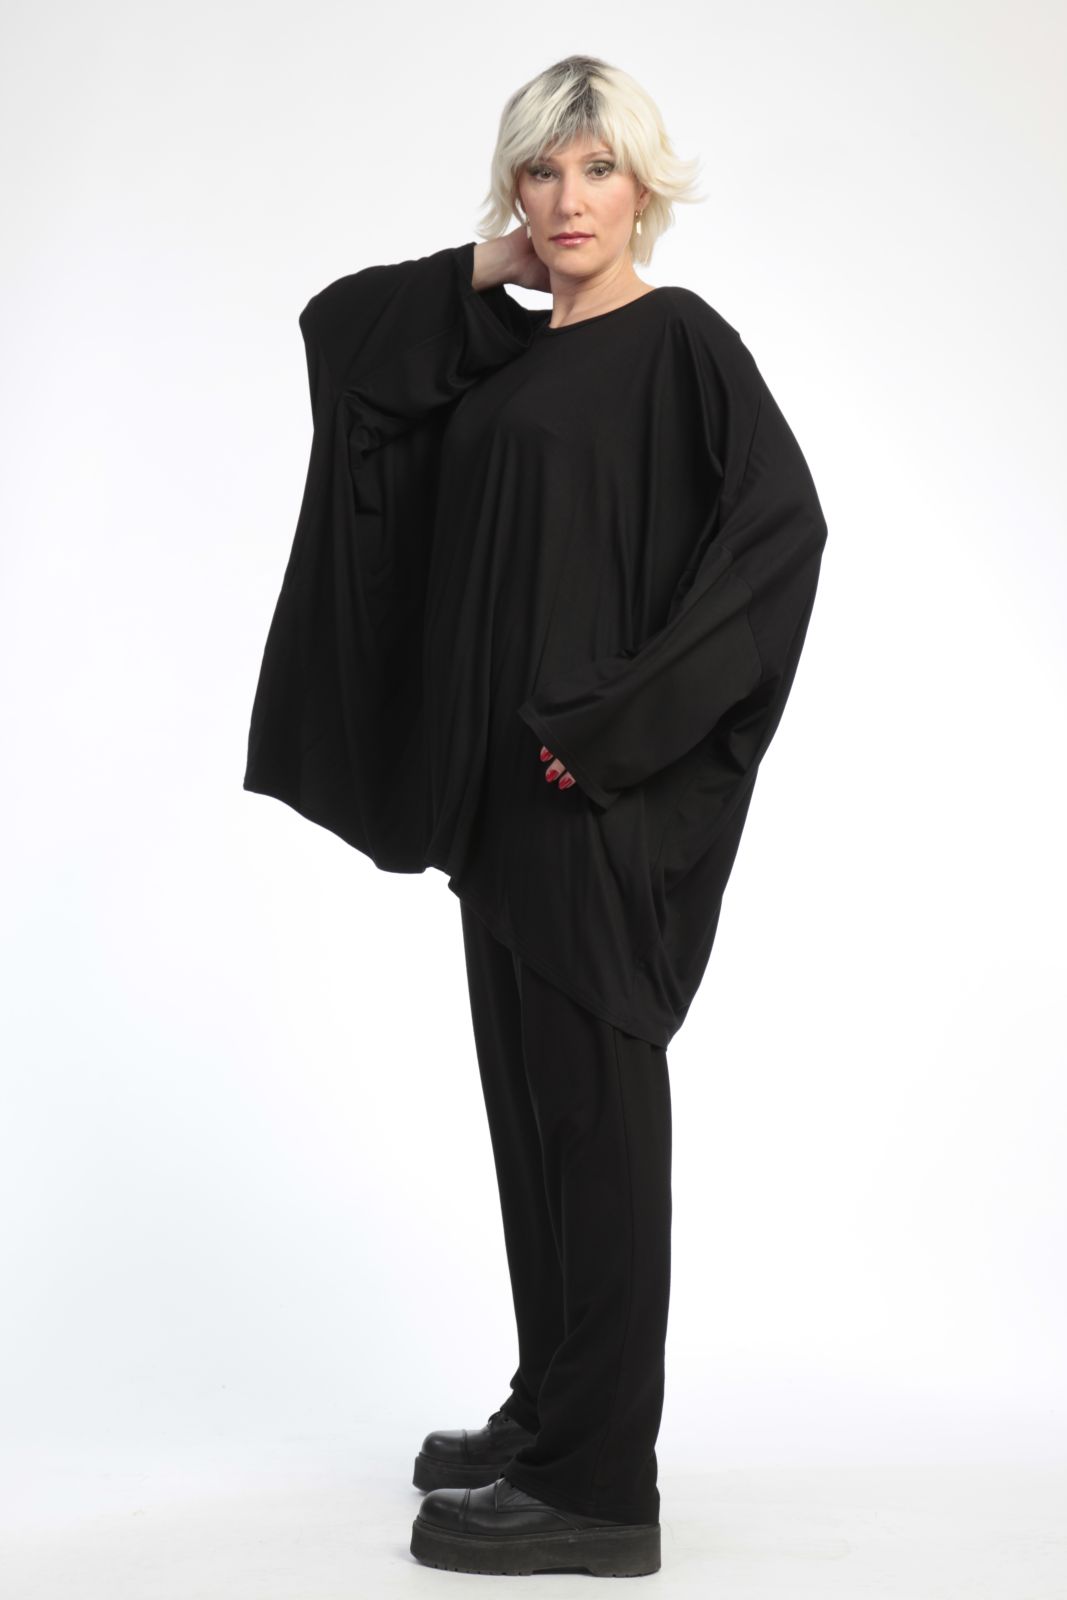 Everyday big shirt in a boxy shape made of soft jersey quality, viscose basics in black